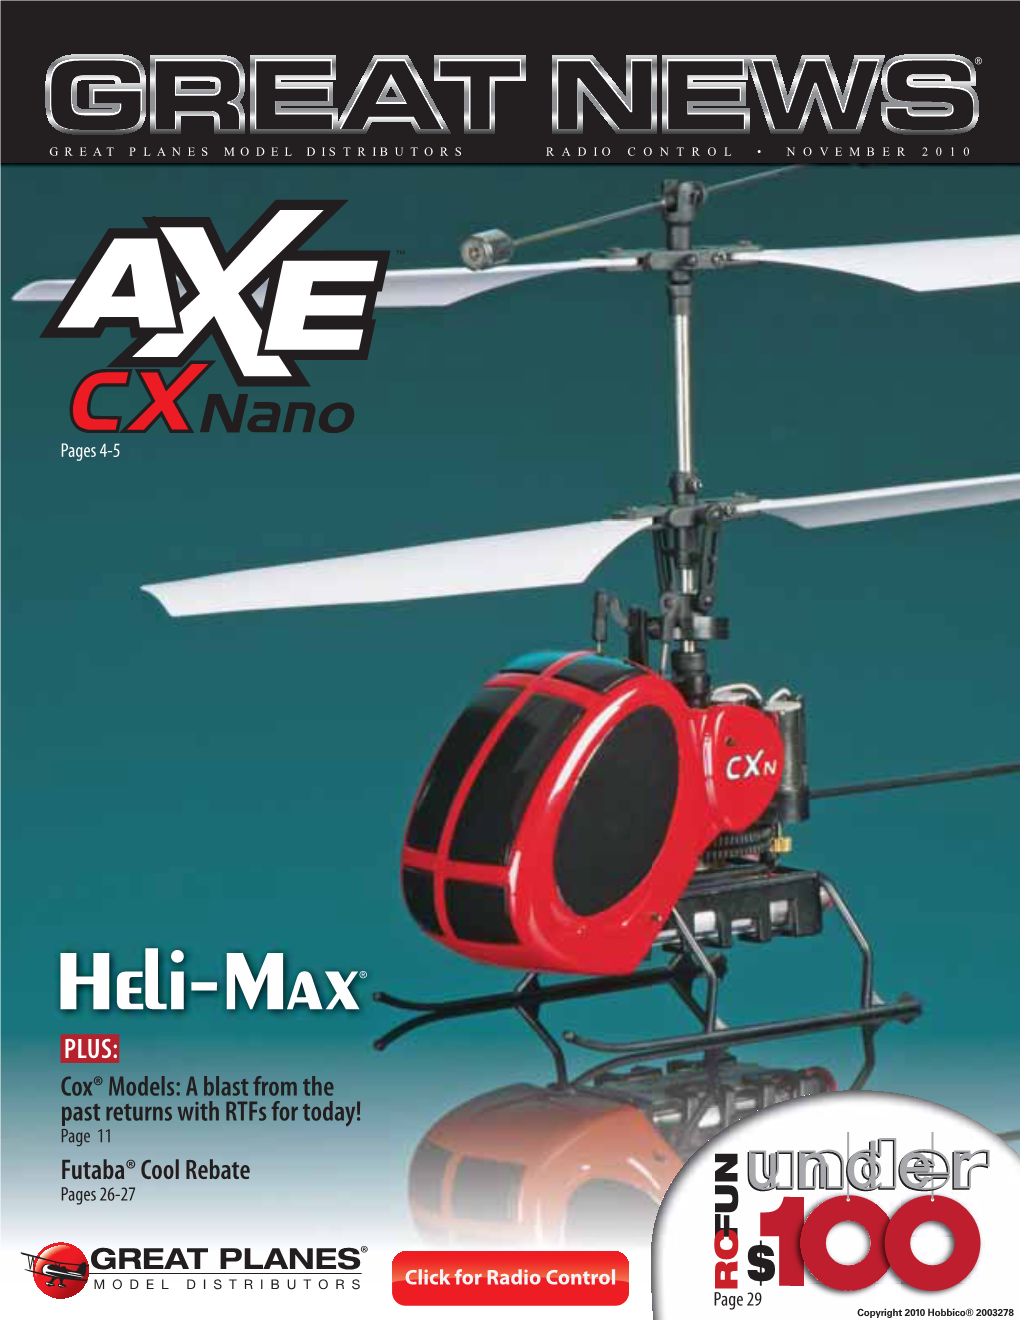 PLUS: Cox® Models: a Blast from the Past Returns with Rtfs for Today! Page 11 Futaba® Cool Rebate Pages 26-27 Under